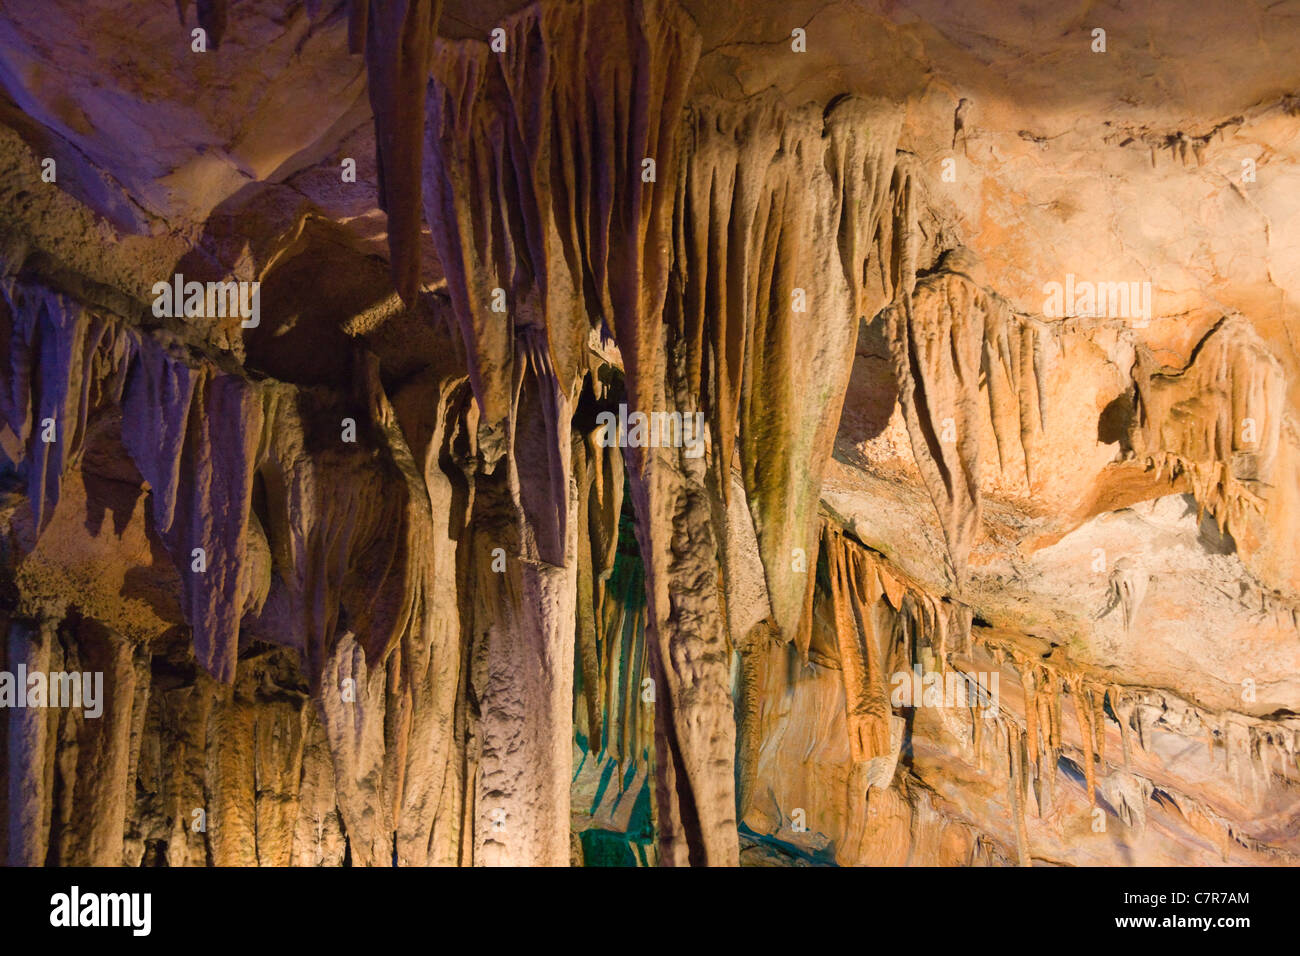 Ludi (Reed Flute) Cave, limestone cave formation, near Guilin, Guangxi Province, China Stock Photo